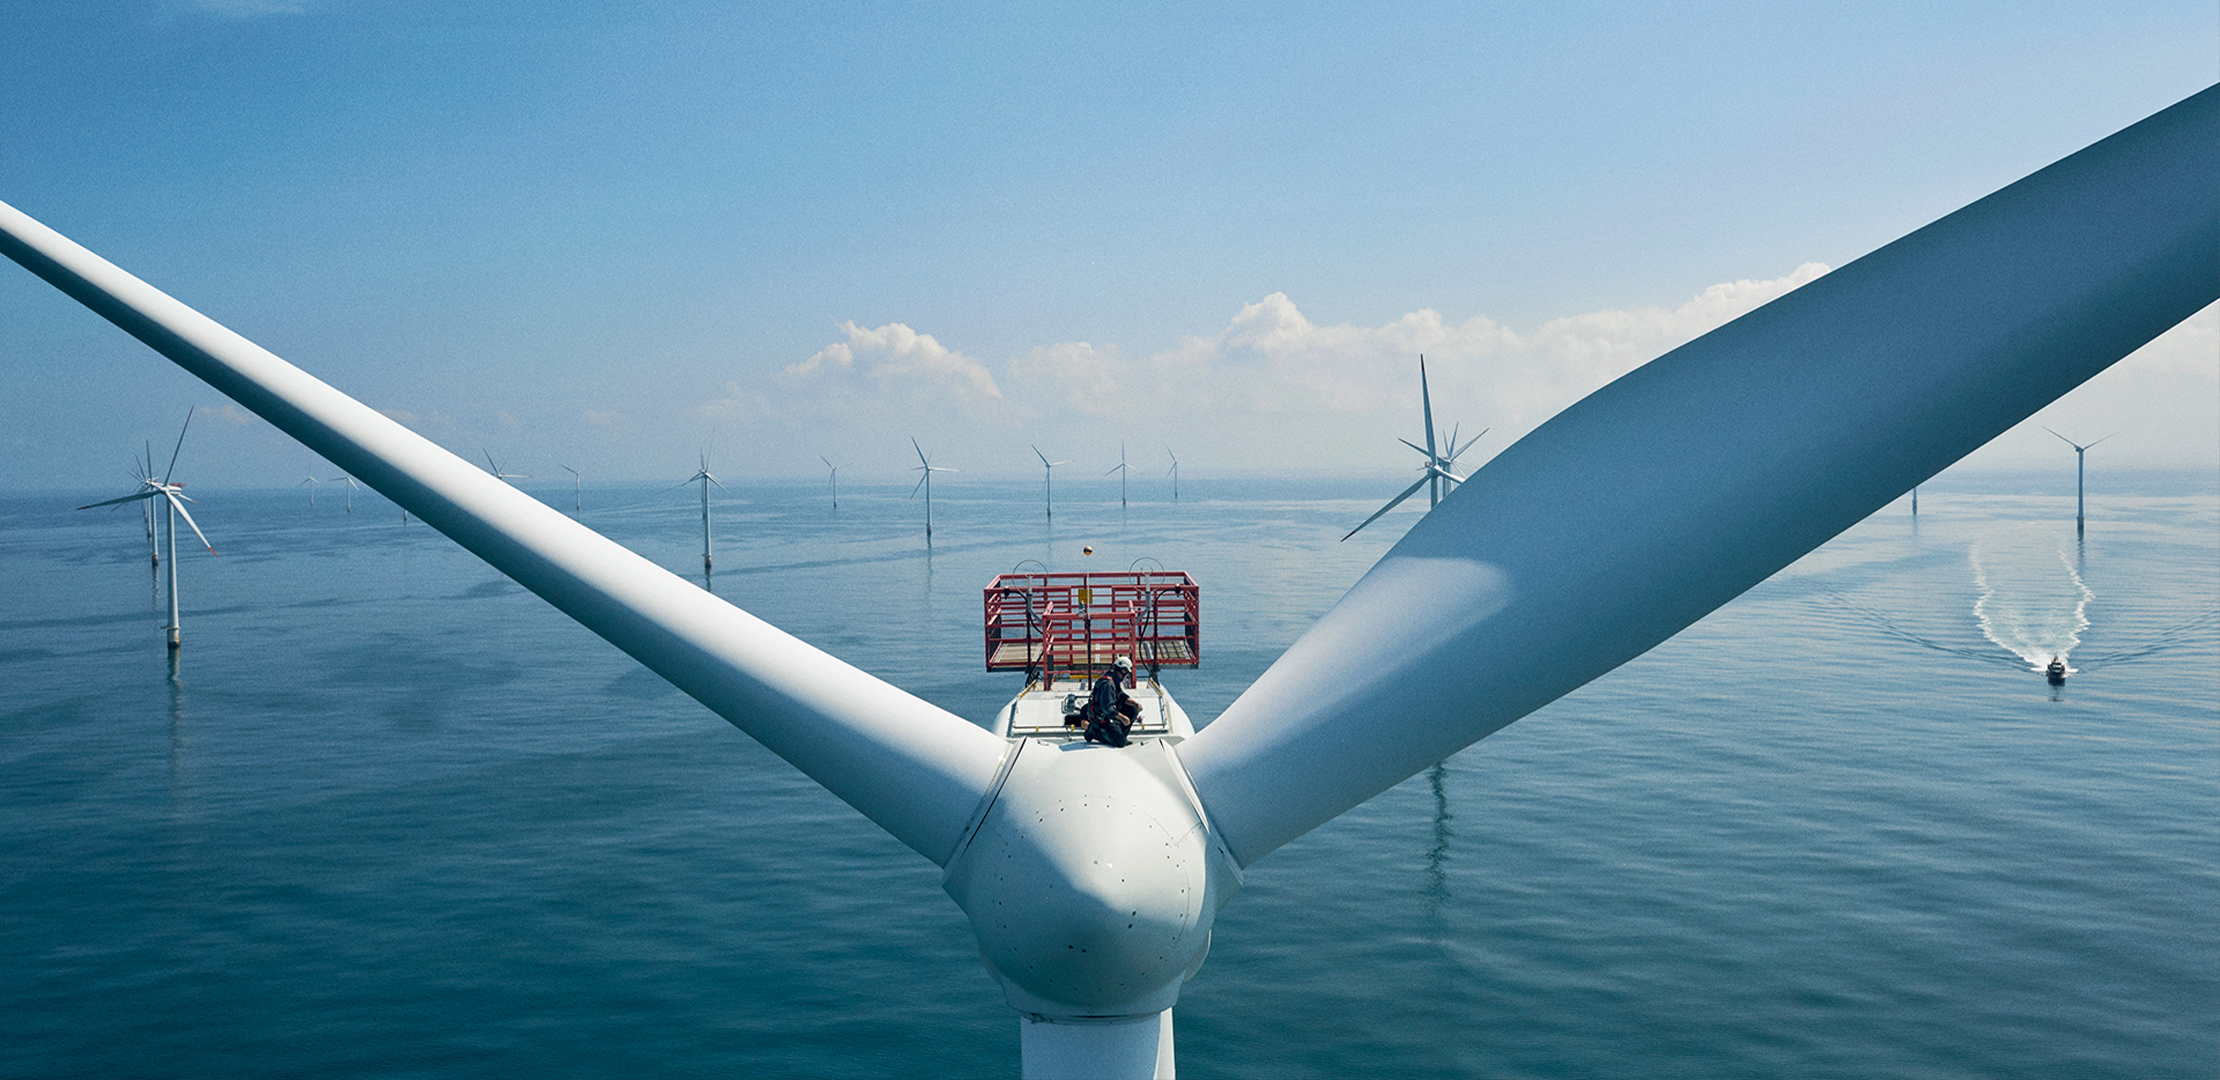 A man sits on top of a wind turbine placed in the ocean